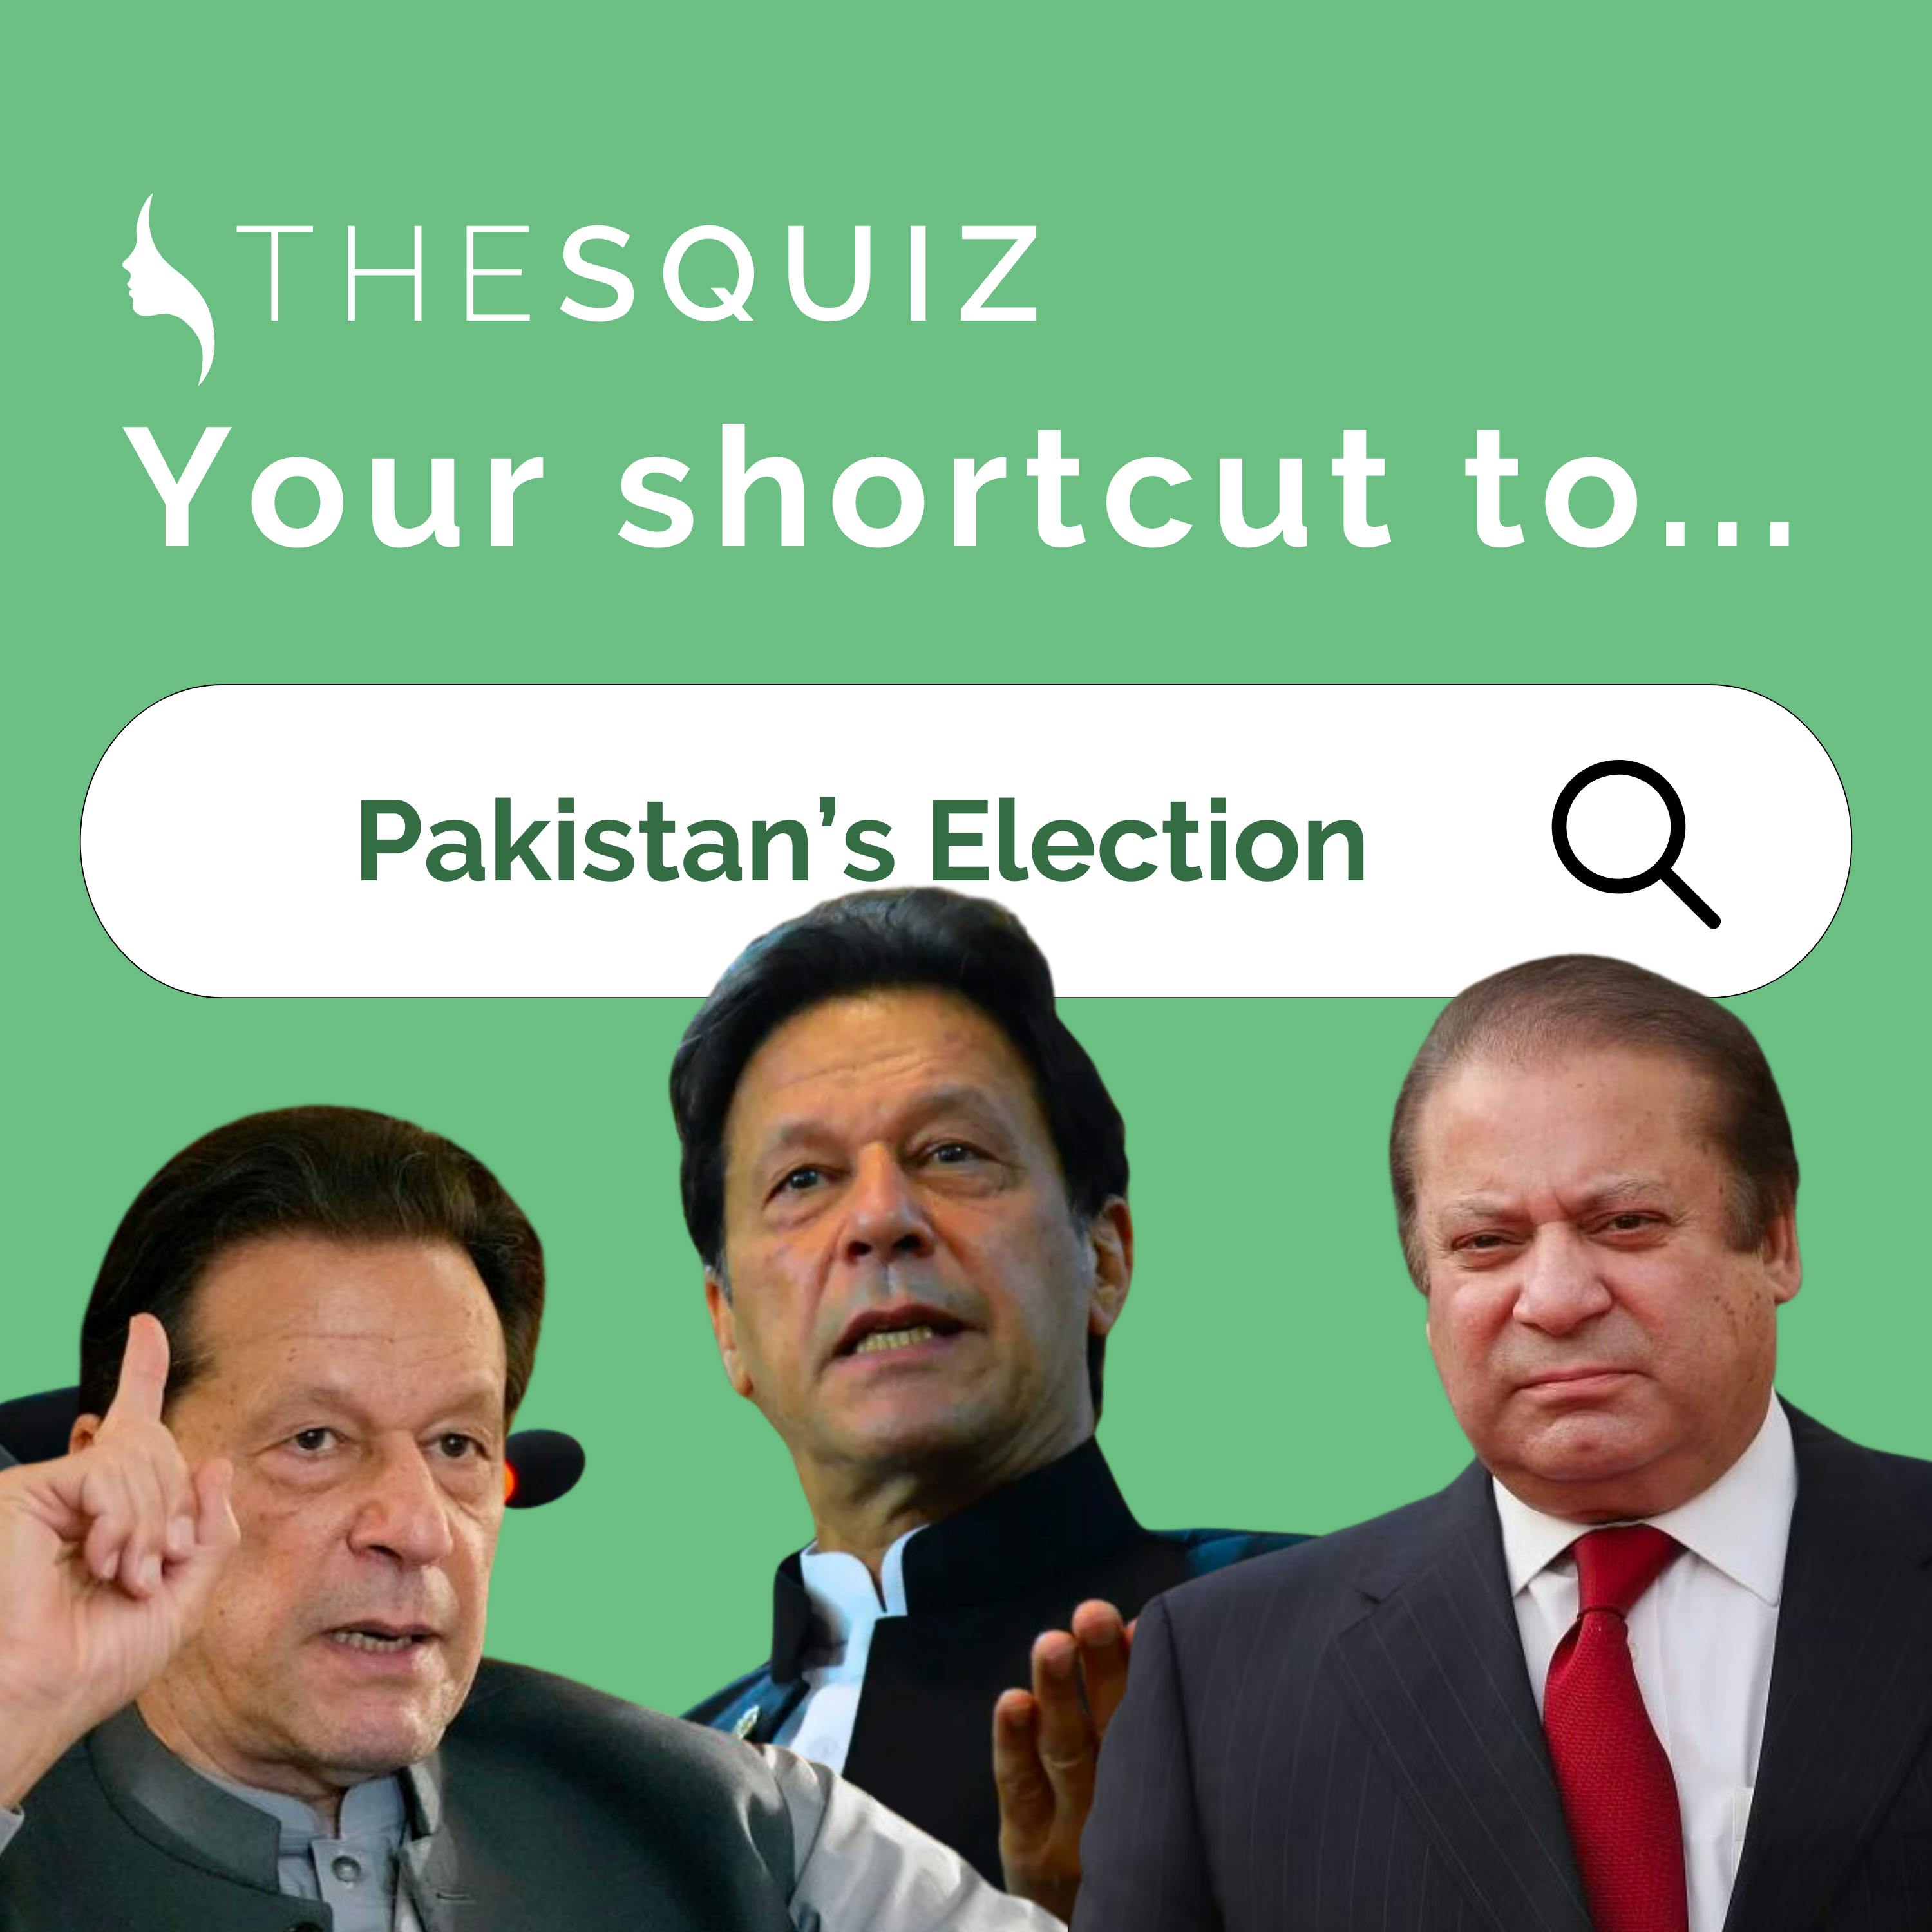 Your Shortcut to... Imran Khan and Pakistan's Election